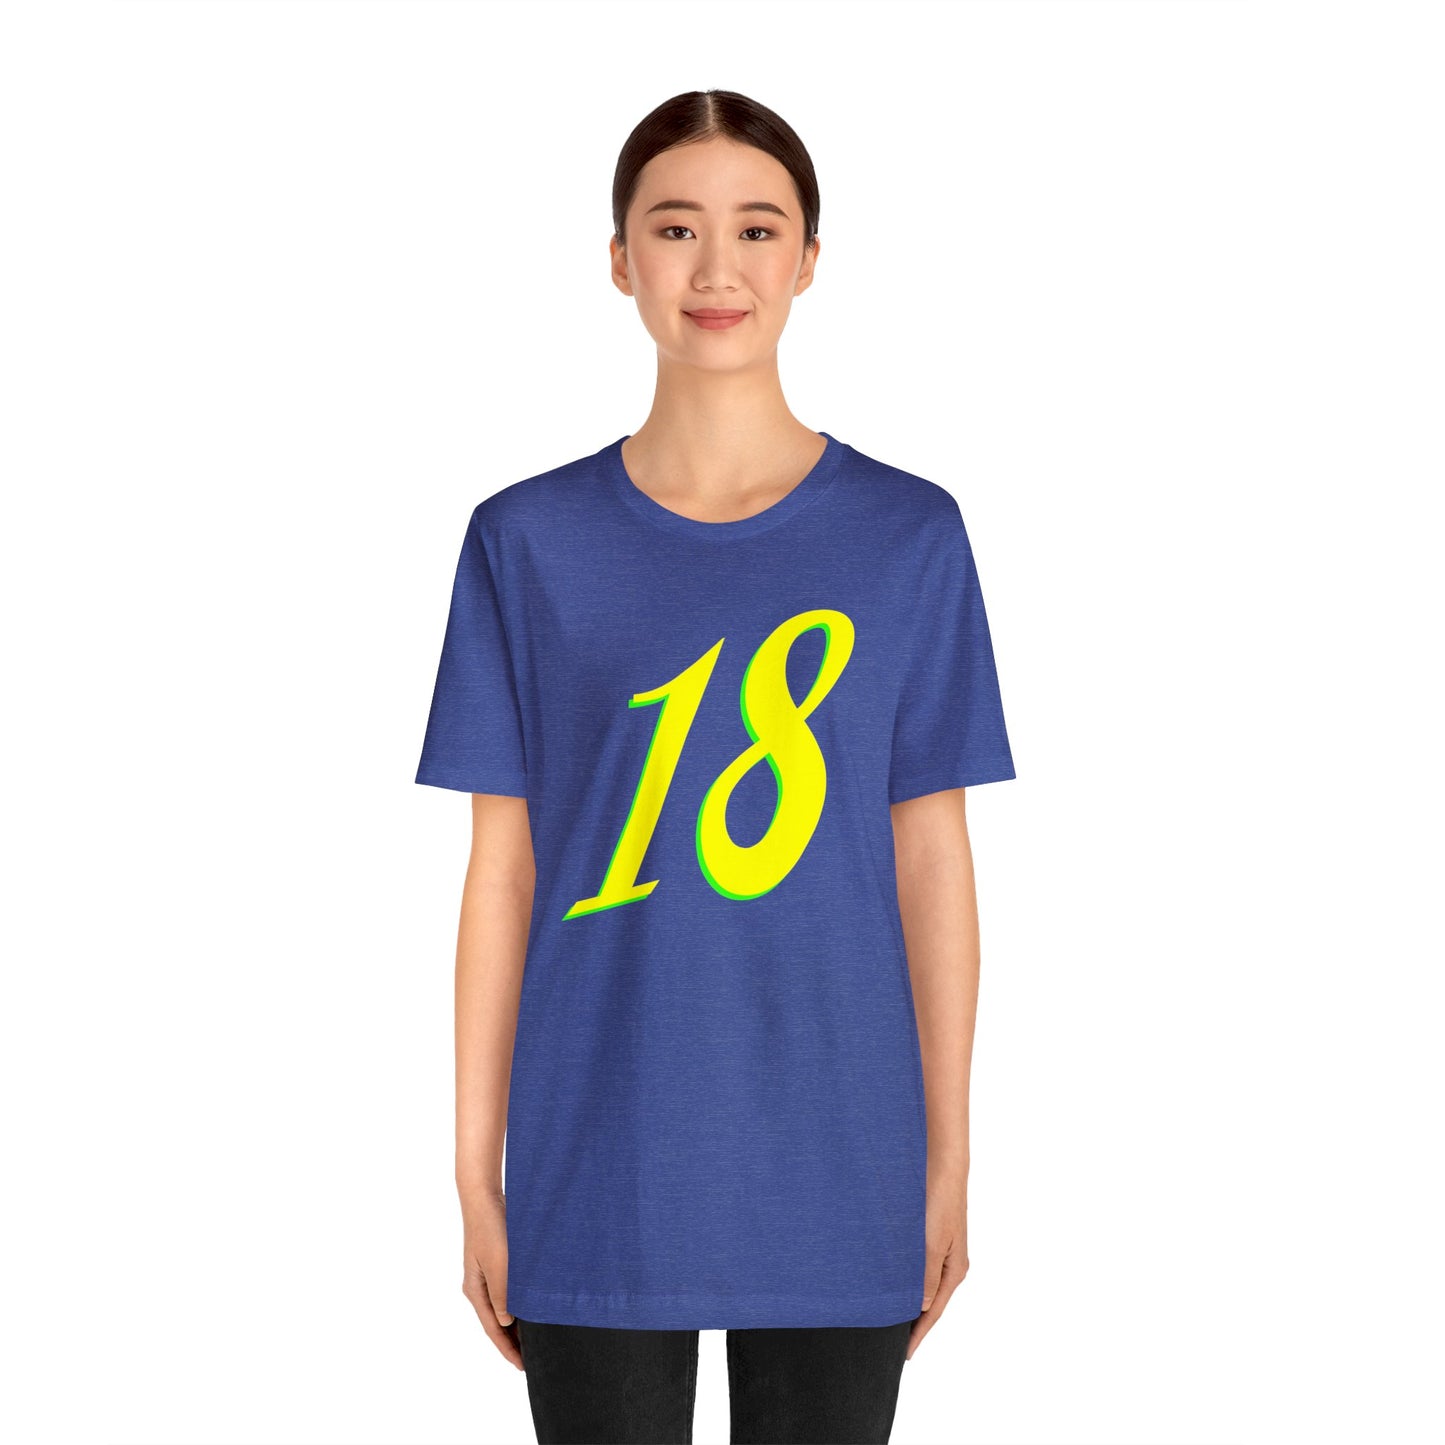 Number 18 Design - Soft Cotton Tee for birthdays and celebrations, Gift for friends and family, Multiple Options by clothezy.com in Black Size Medium - Buy Now